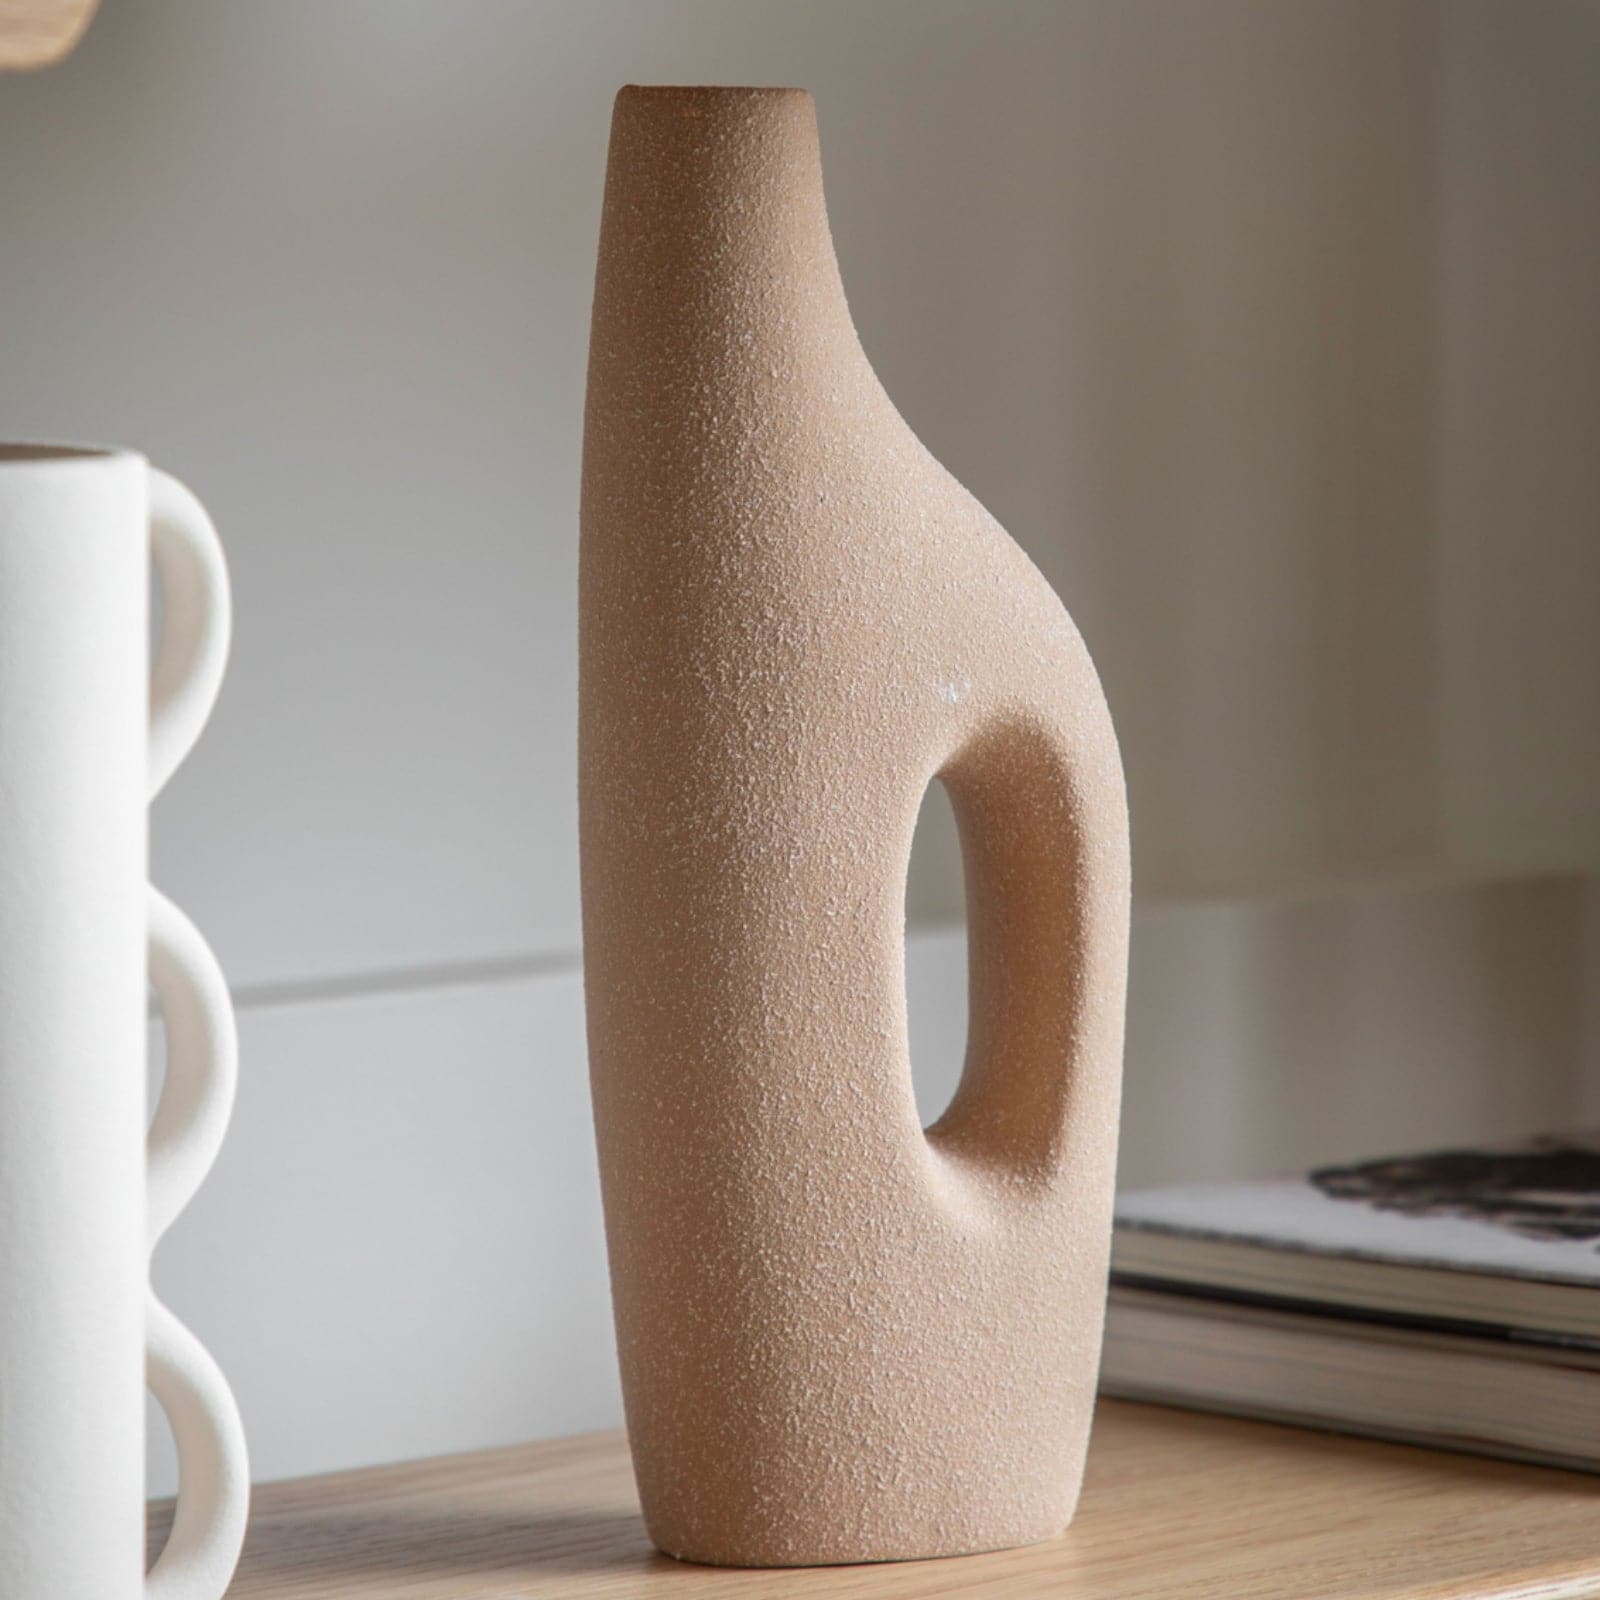 Textured Soft Shaped Vase - The Farthing